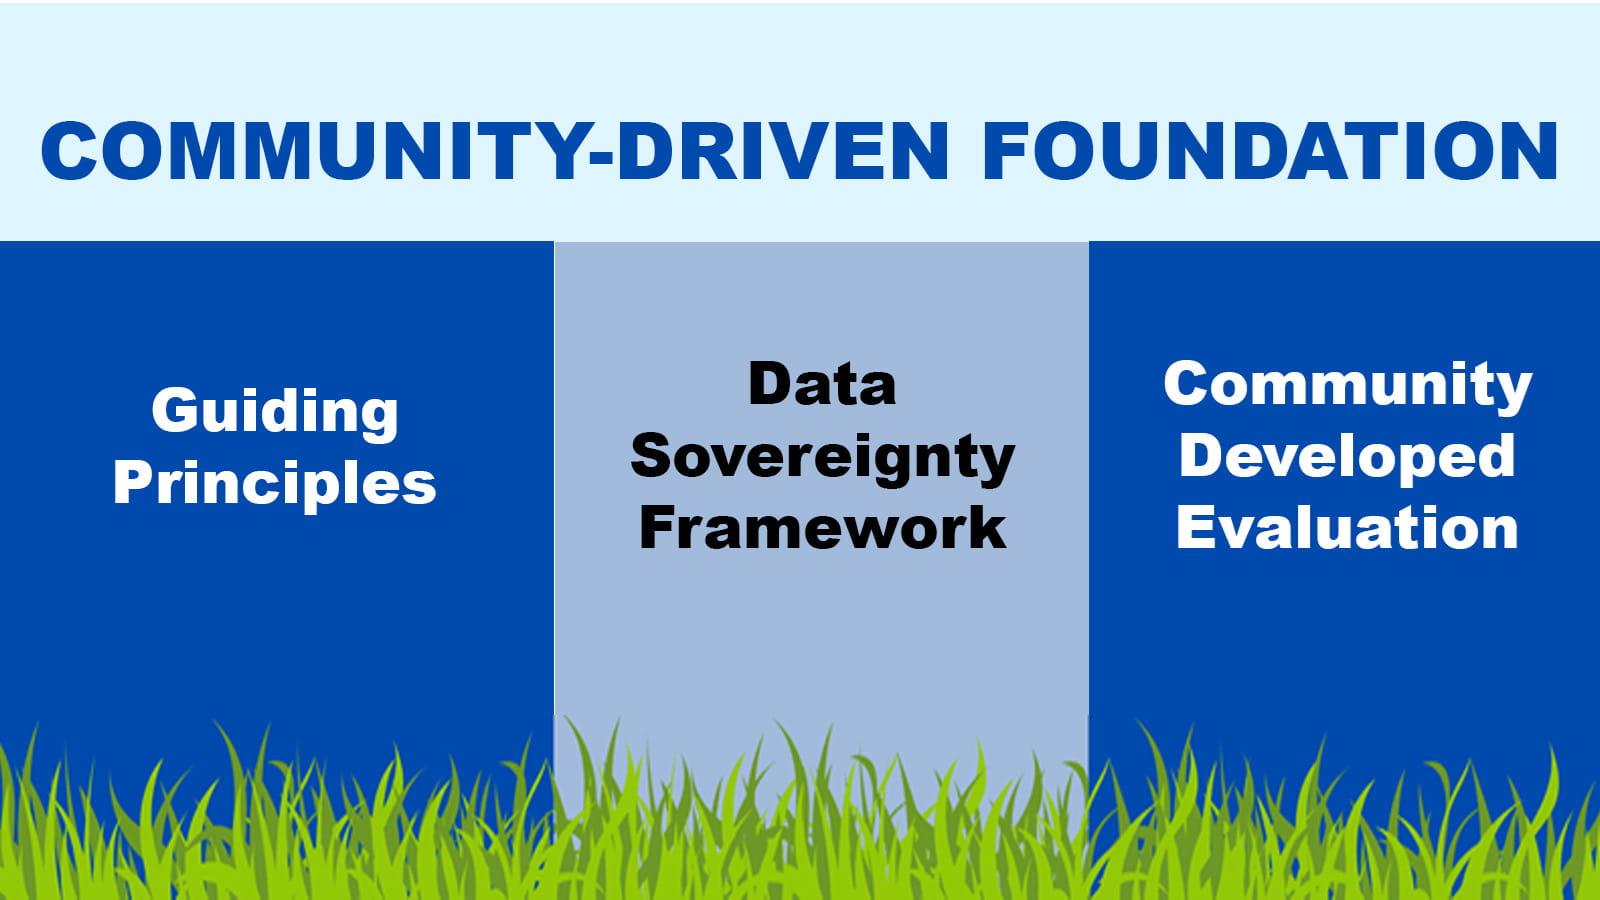 Community-Driven Foundation: Guiding Principles, Data Sovereignty Frameworks, and Community Developed Evaluation